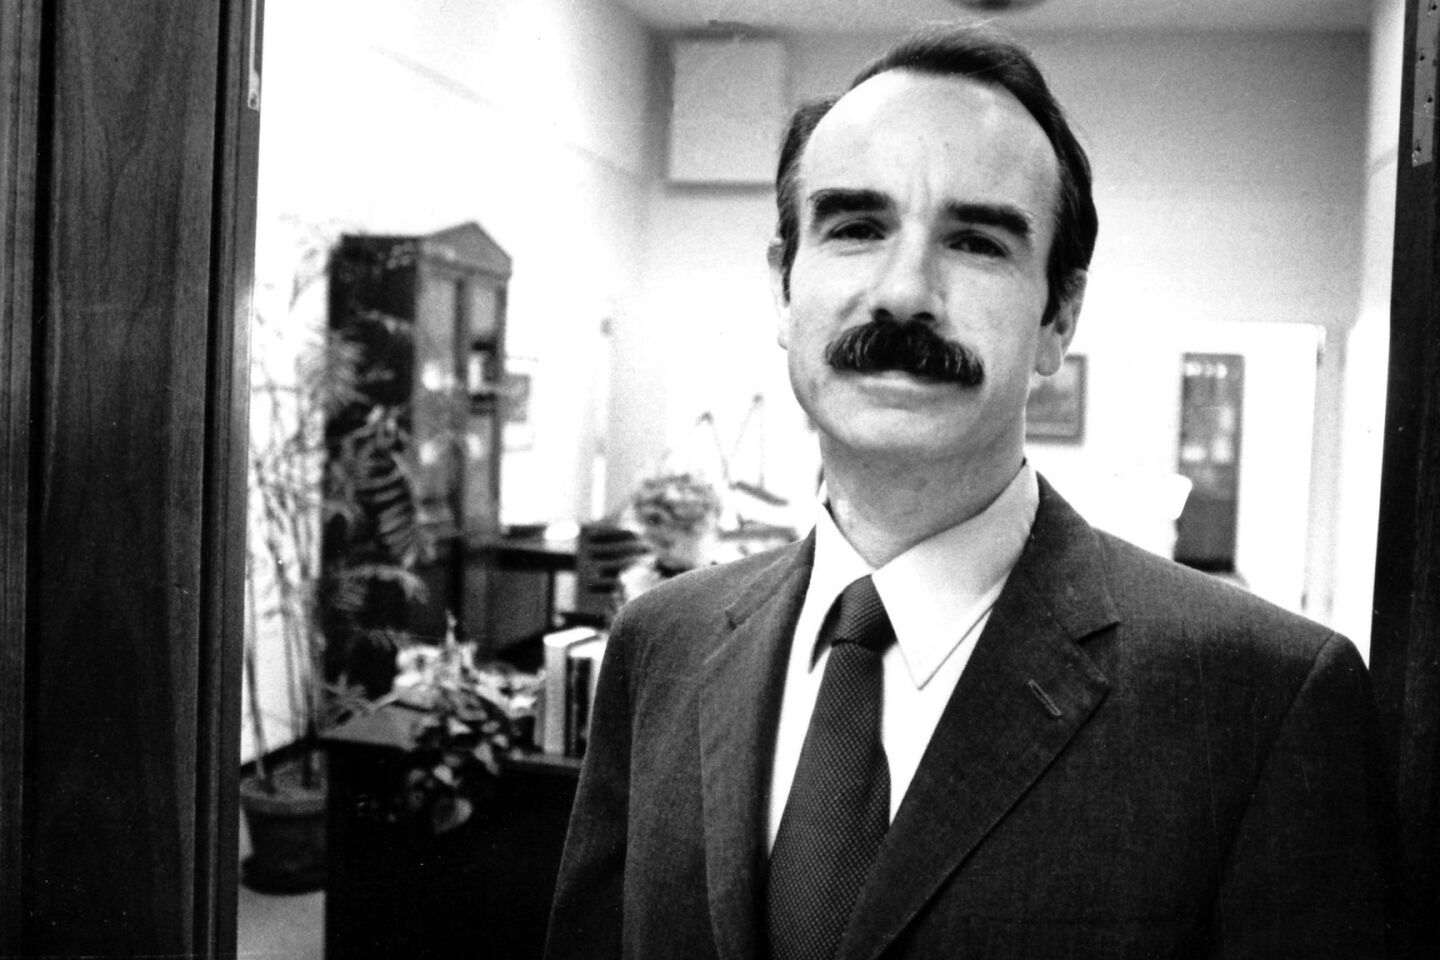 G. Gordon Liddy, the tough-guy Watergate operative who went to prison rather than testify and later turned his Nixon-era infamy into a successful television and talk show career, died at age 90.